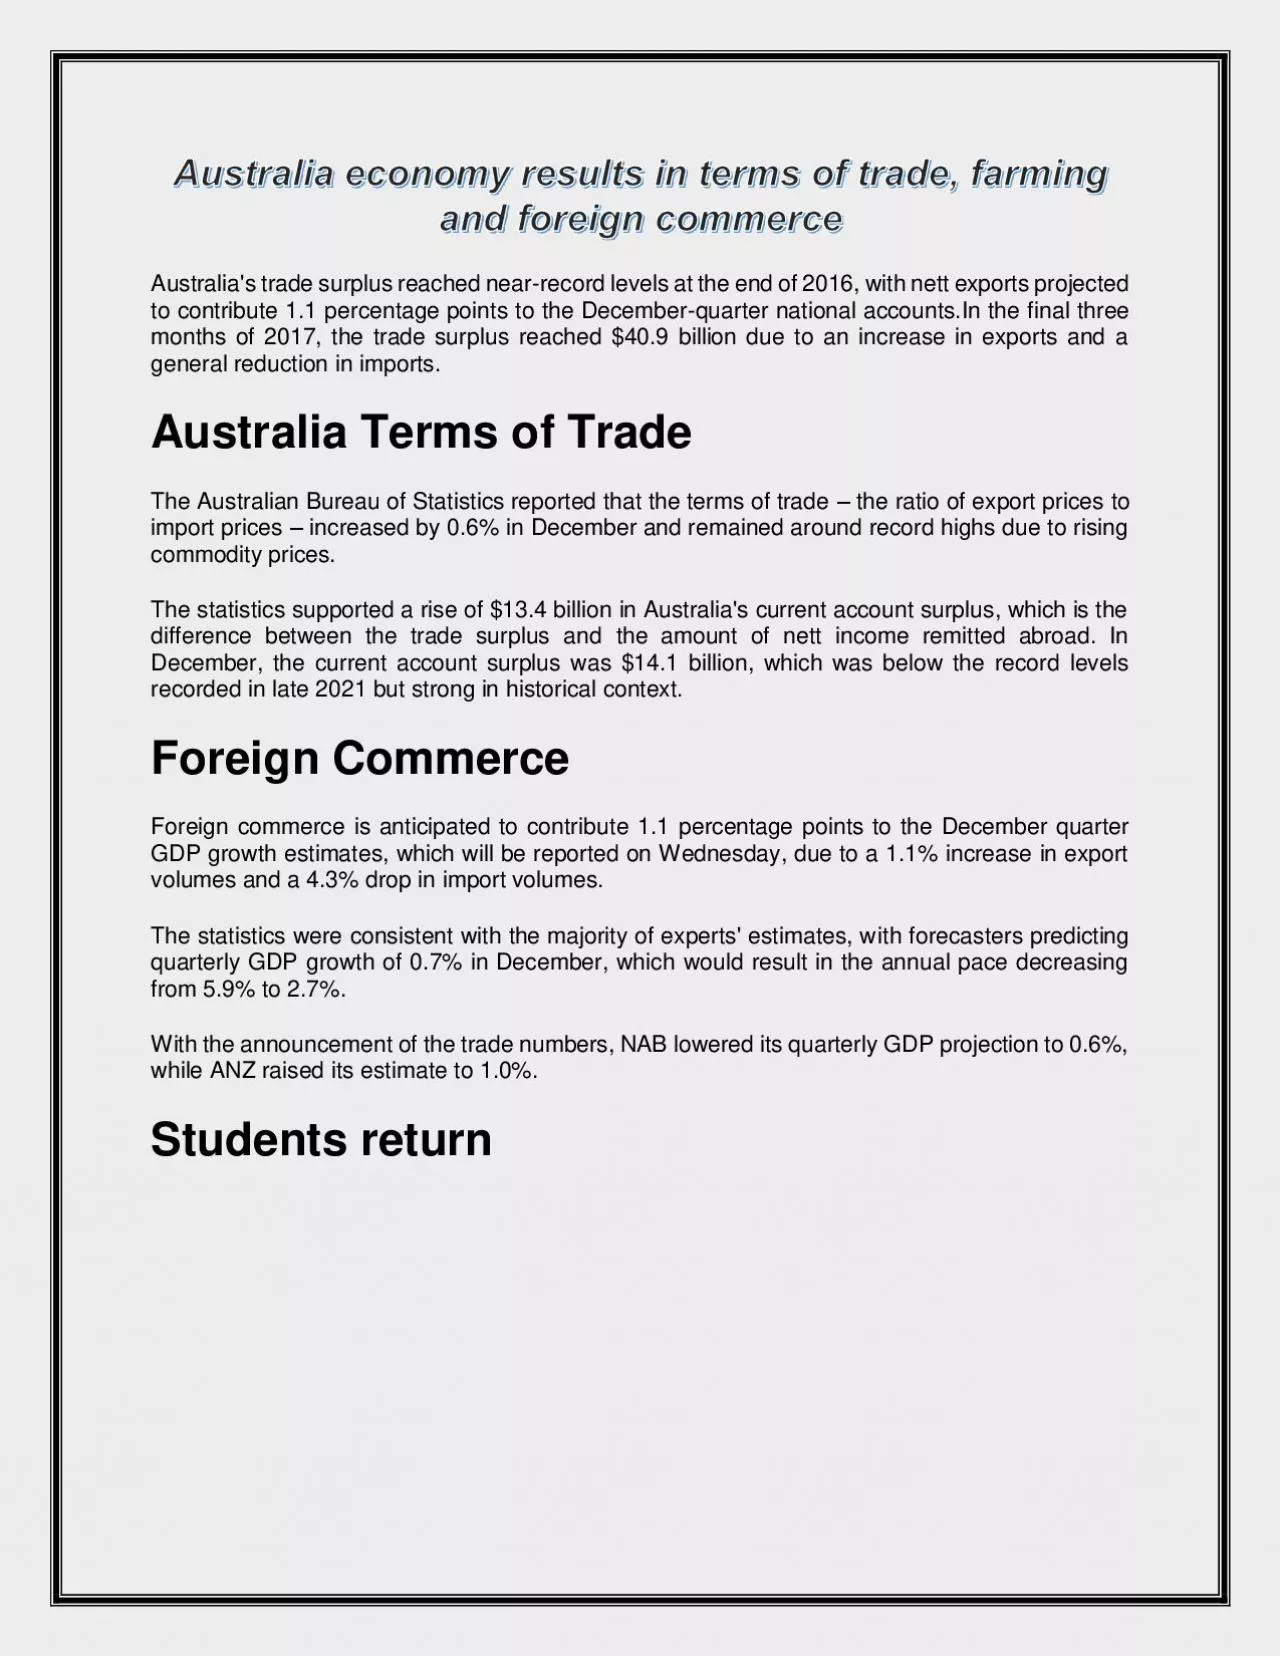 Australia economy results in terms of trade, farming and foreign commerce